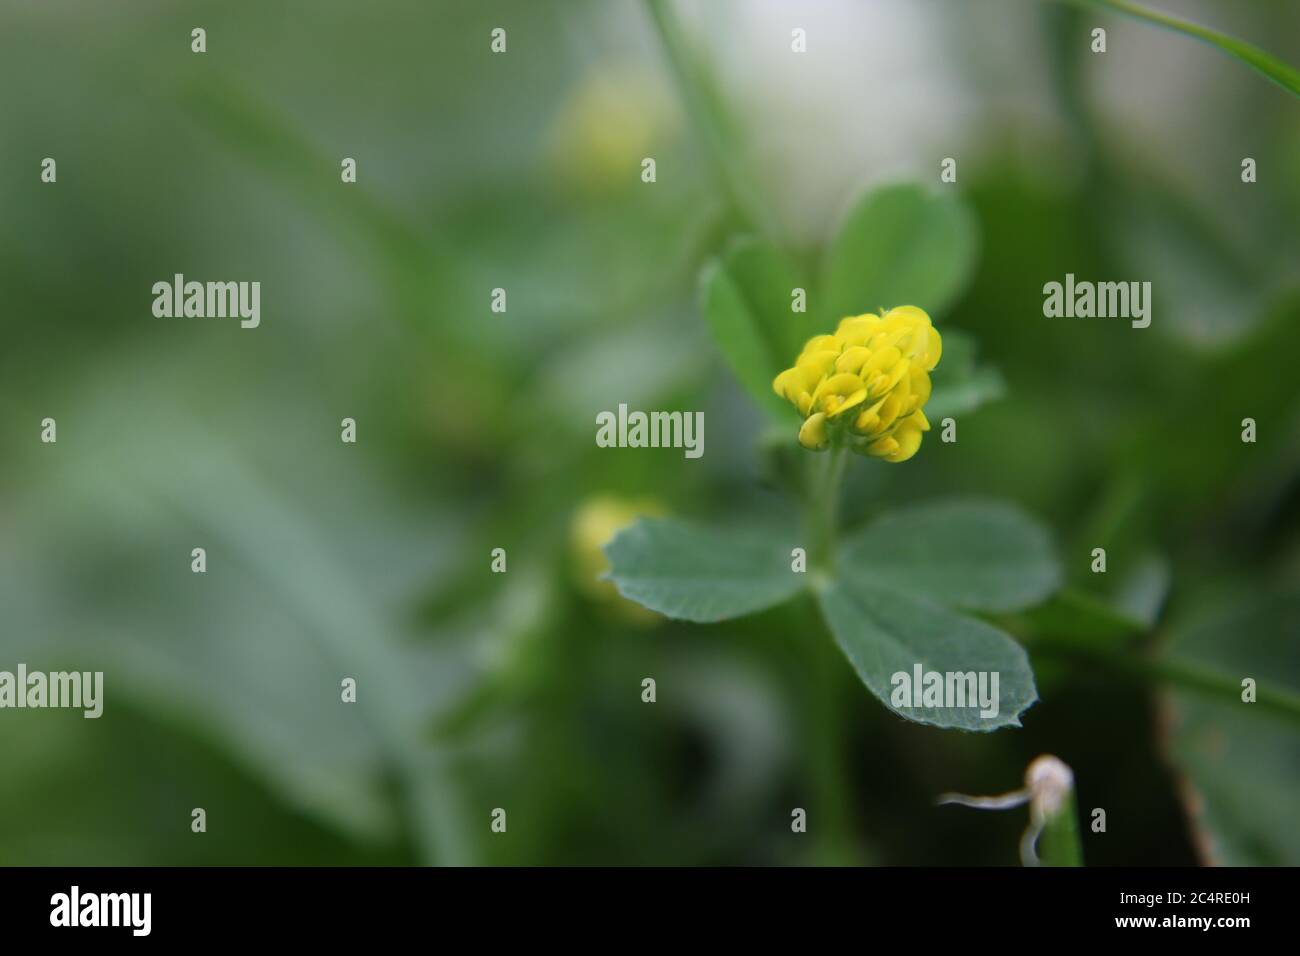 Tiny Medicago lupulina yellow clover,black medick, nonesuch, or hop clover, flower growing on the lawn. Stock Photo